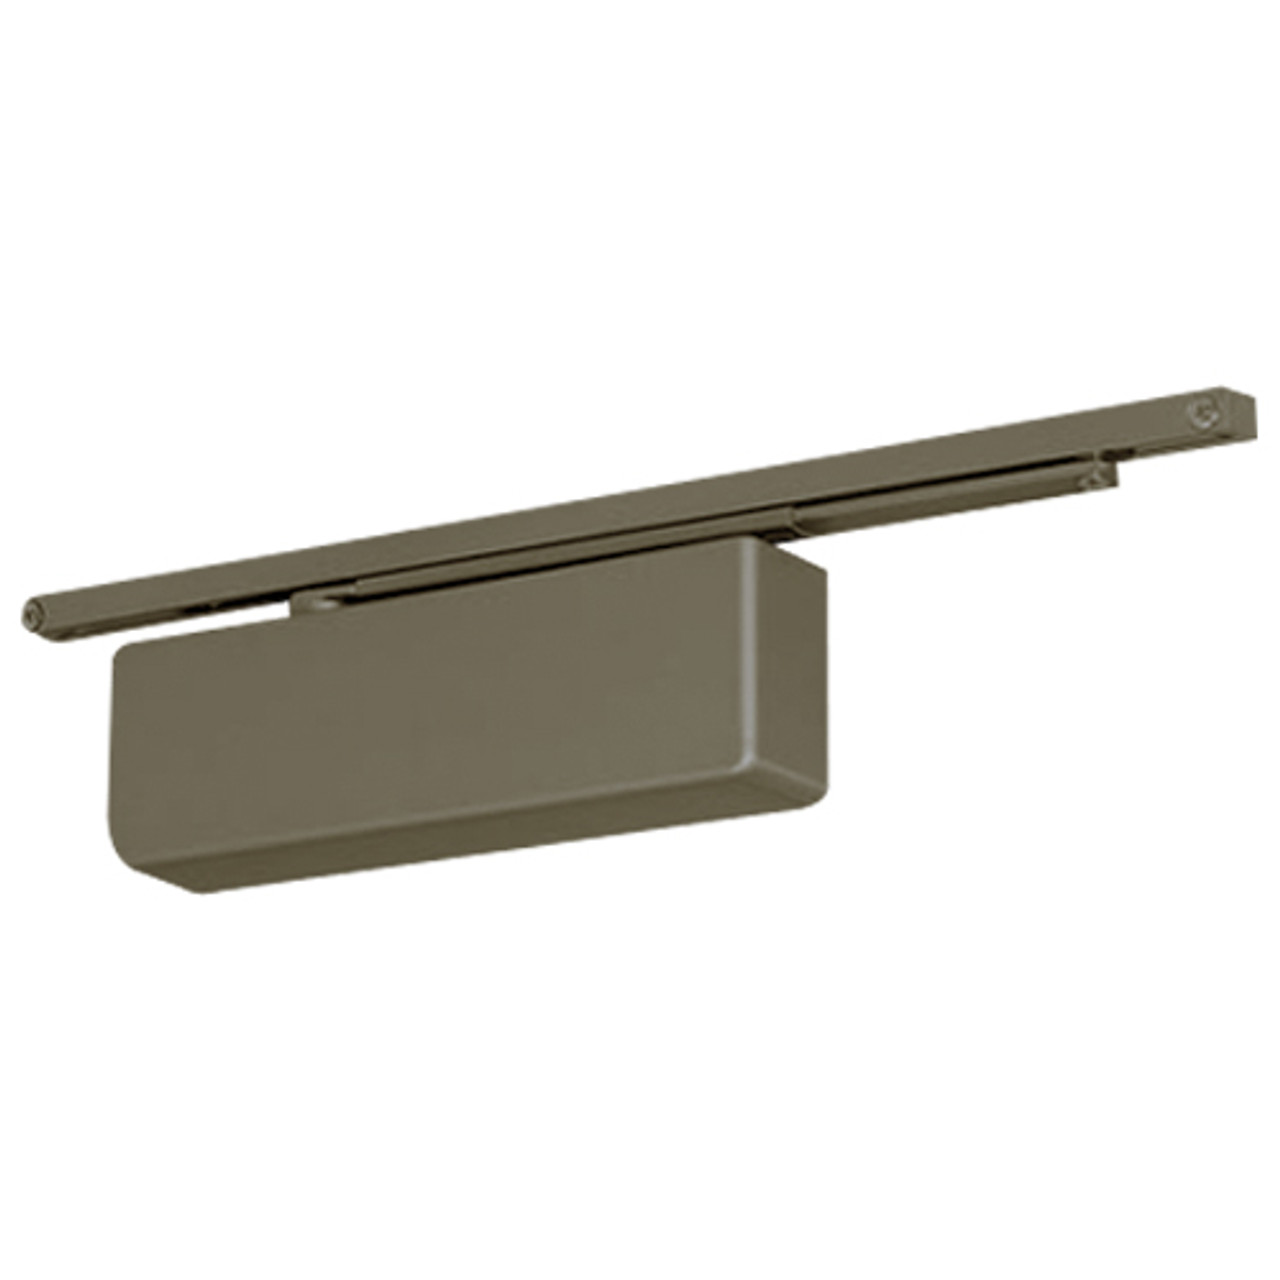 4440ST-694 Yale 4400 Series Institutional Door Closer with Pull Side Low Profile Slide Track Arm in Medium Bronze